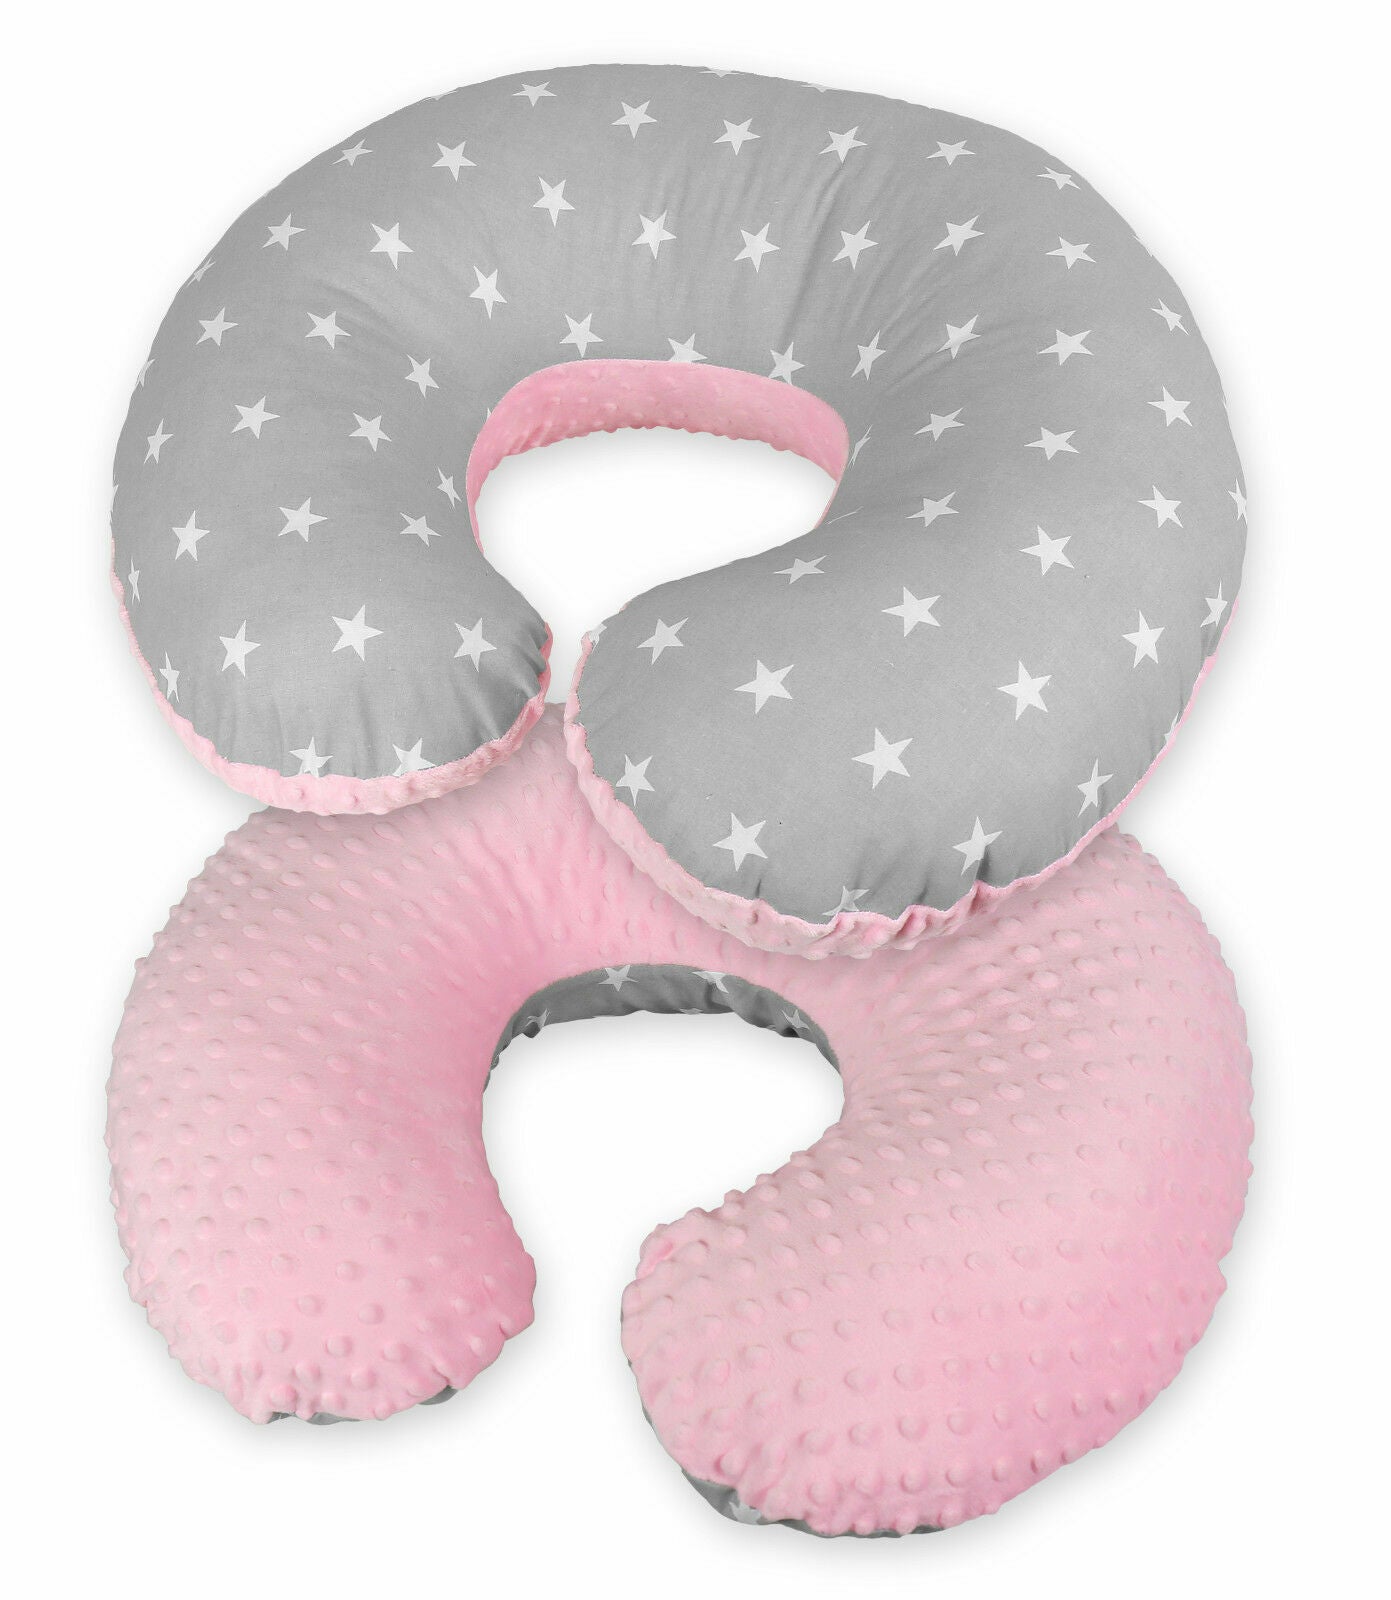 Baby Feeding Pregnancy Pillow Cover Newborn Nursing Dimple Pink/ small white stars on grey